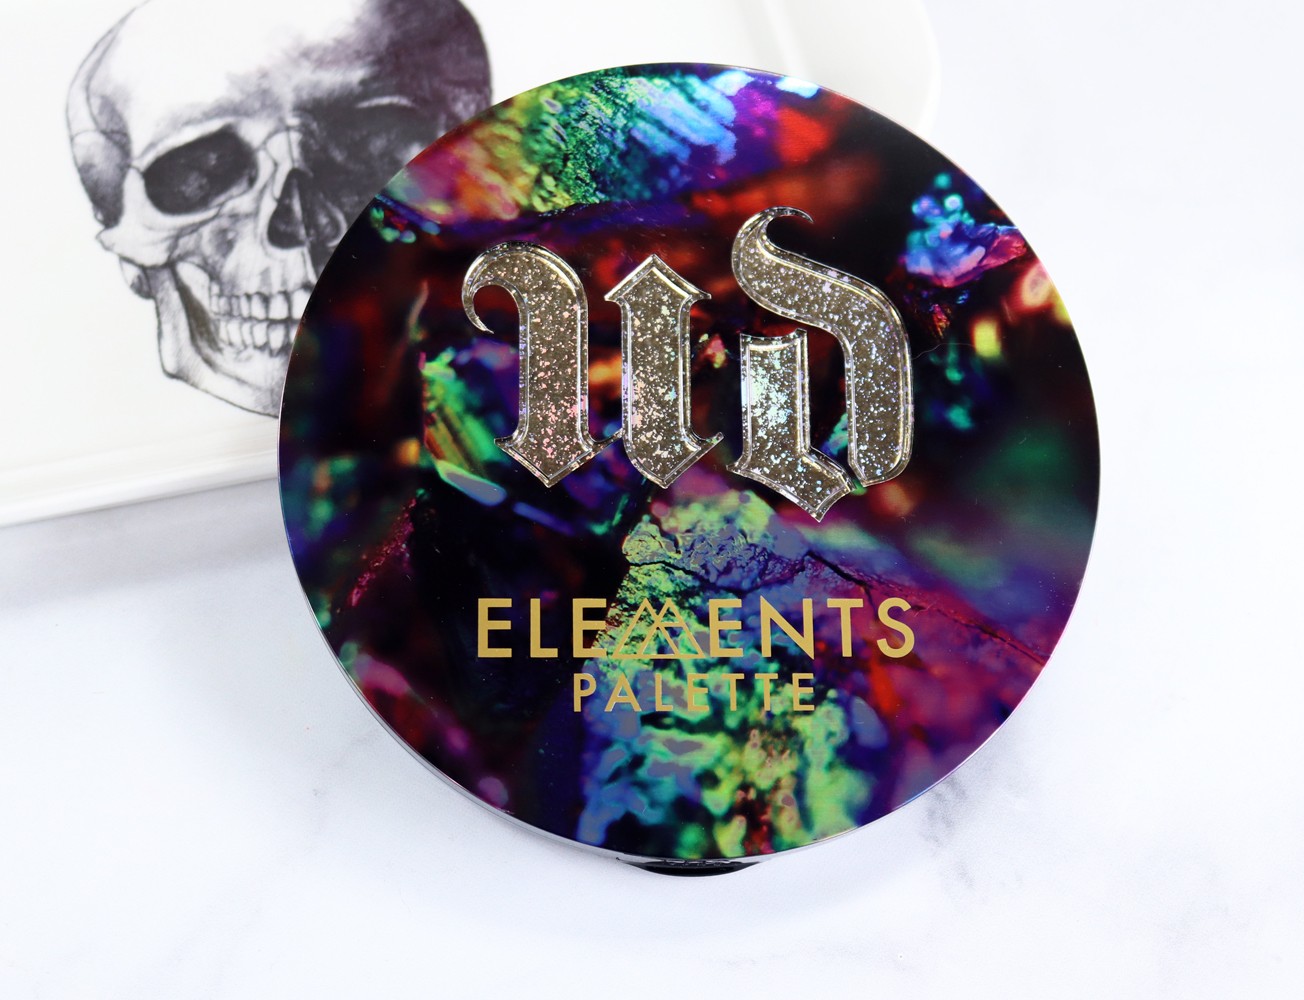 Urban Decay Elements Palette Review and Swatches featured by popular Los Angeles cruelty free beauty blogger My Beauty Bunny